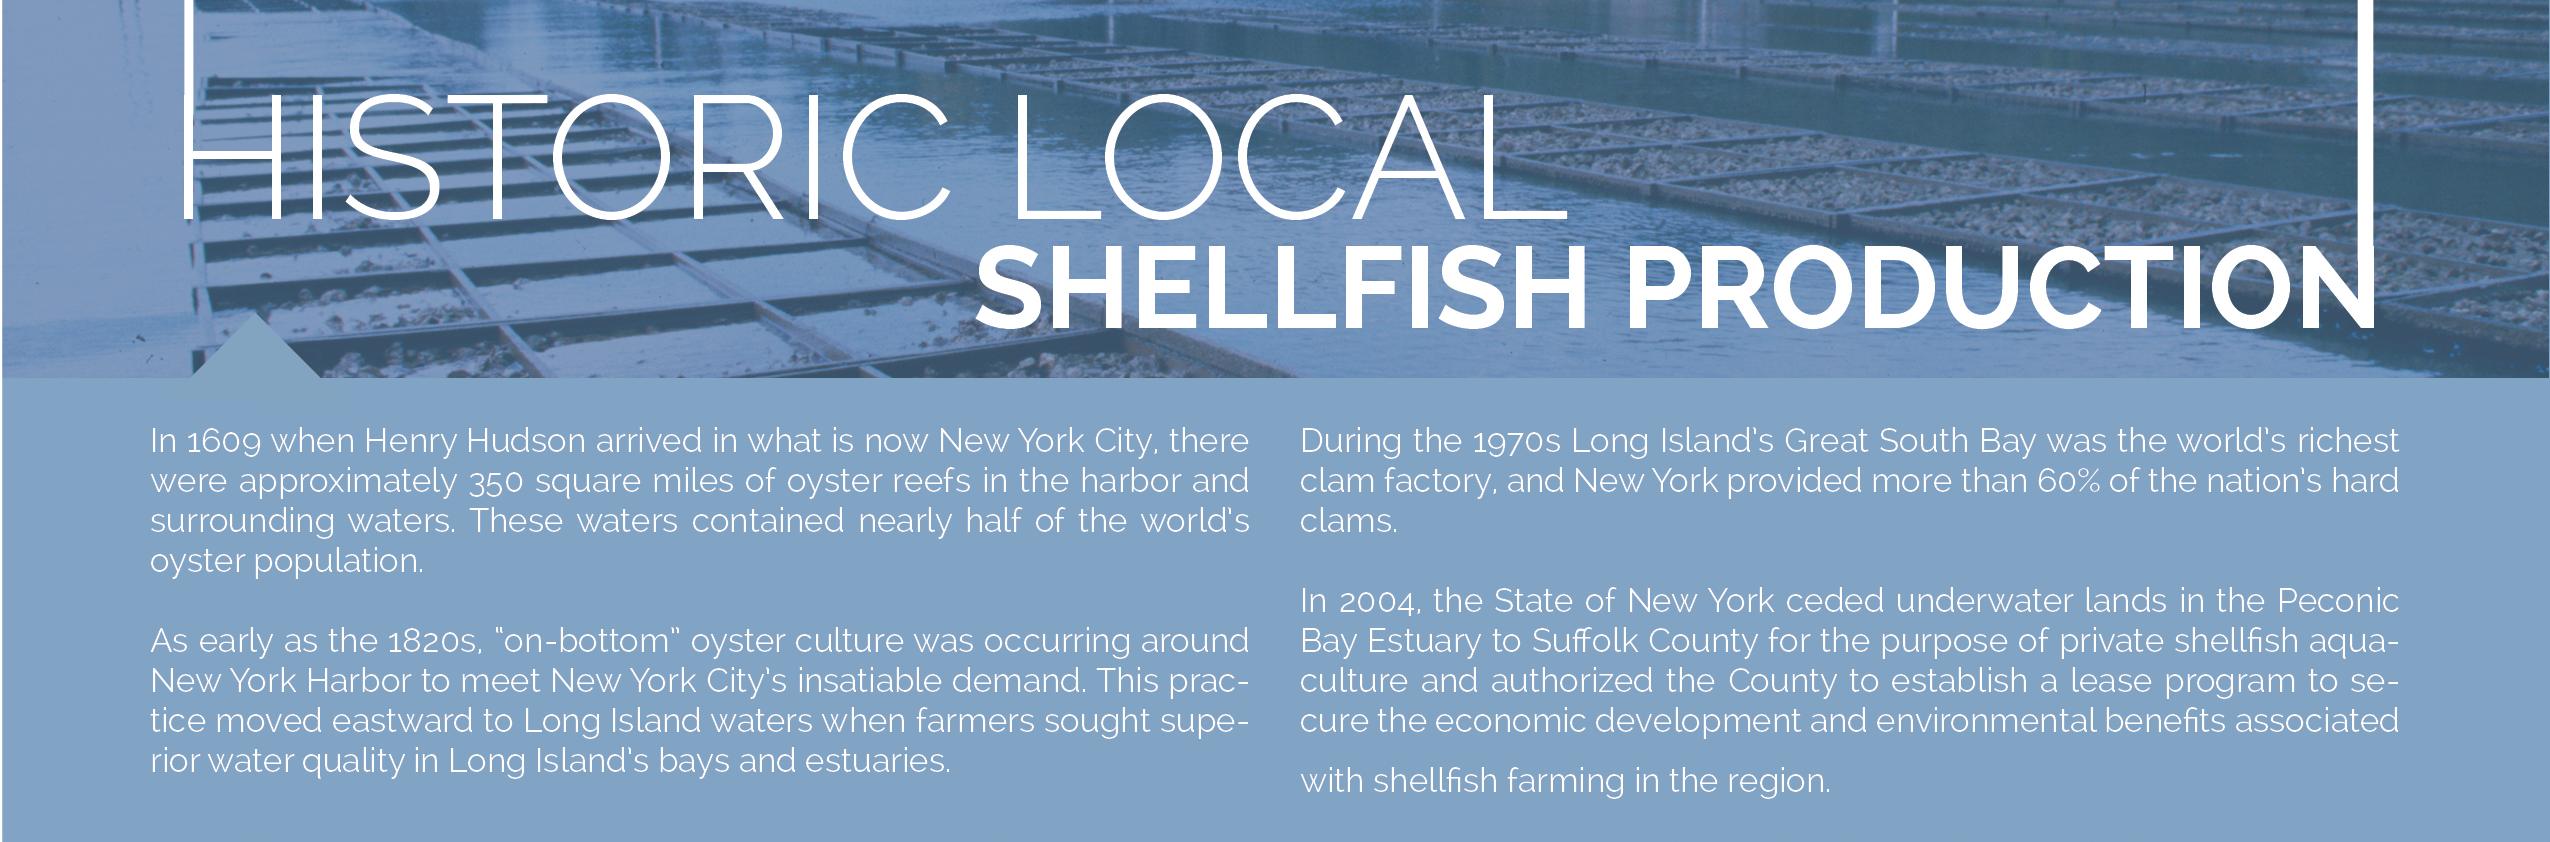 the words historical local shellfish with a background of a shellfish farm 